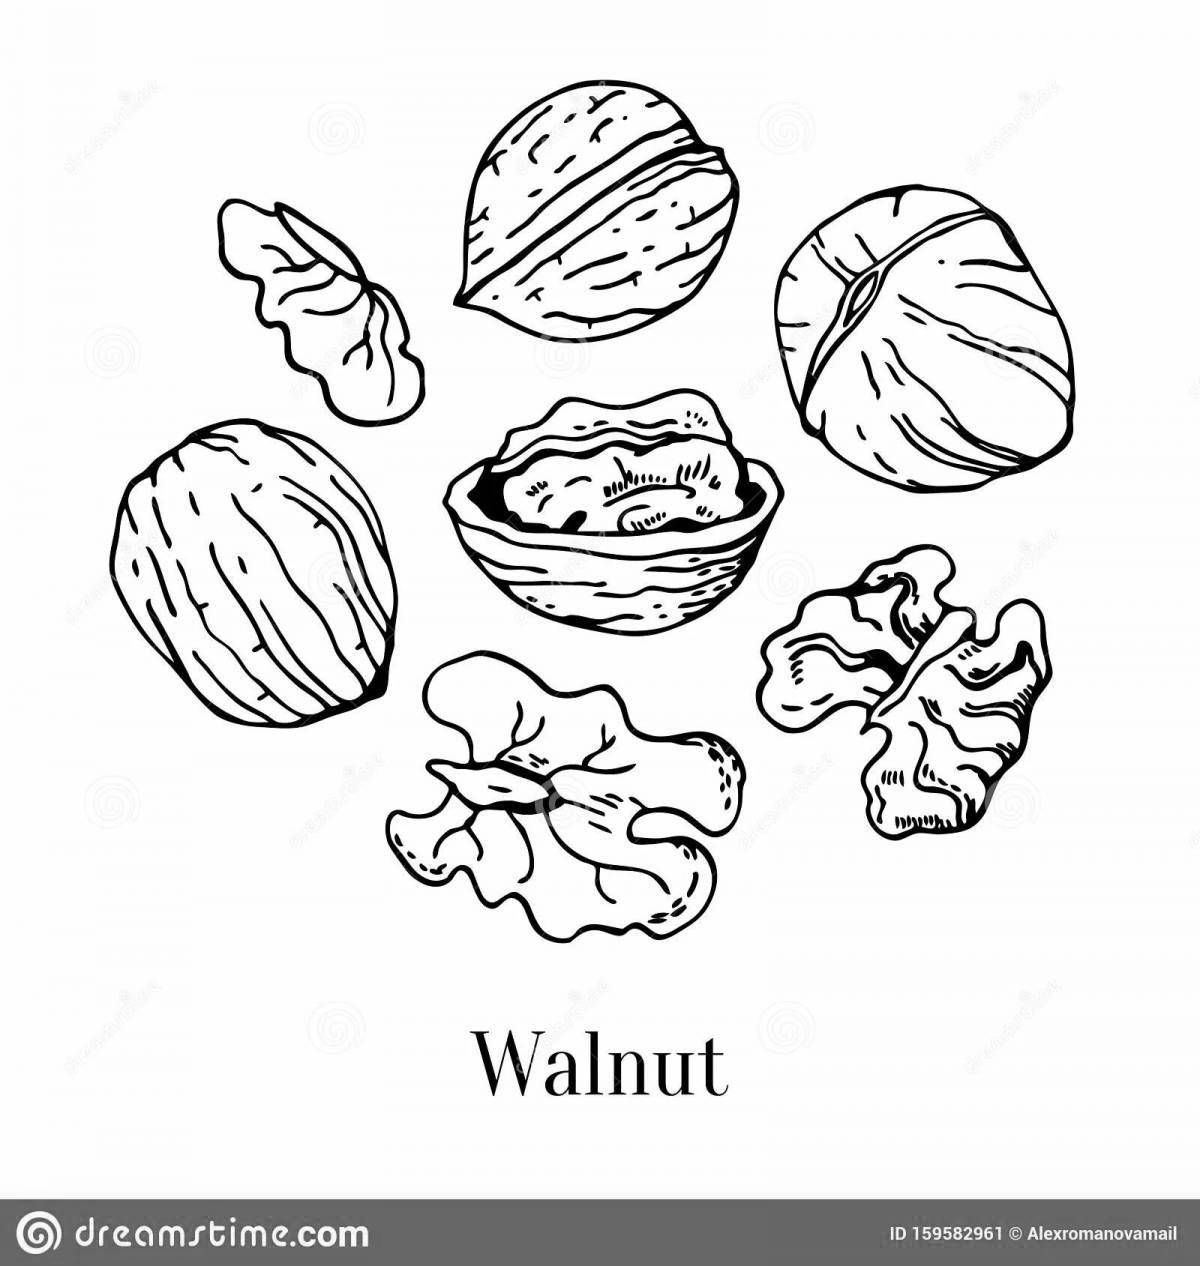 Adorable walnut coloring book for babies